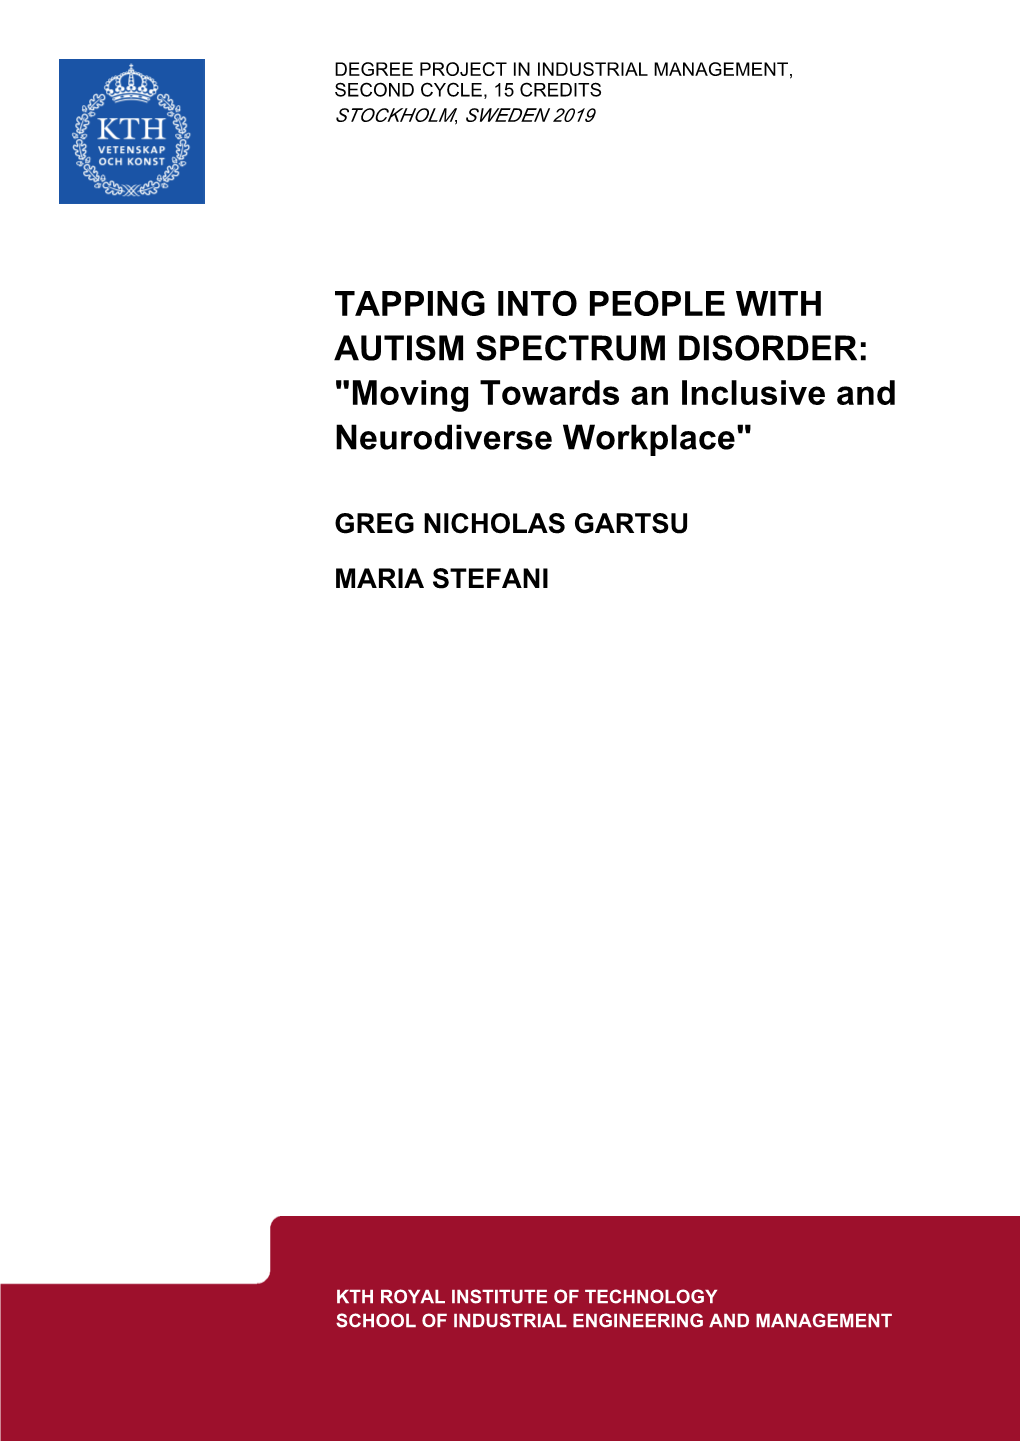 TAPPING INTO PEOPLE with AUTISM SPECTRUM DISORDER: "Moving Towards an Inclusive and Neurodiverse Workplace"